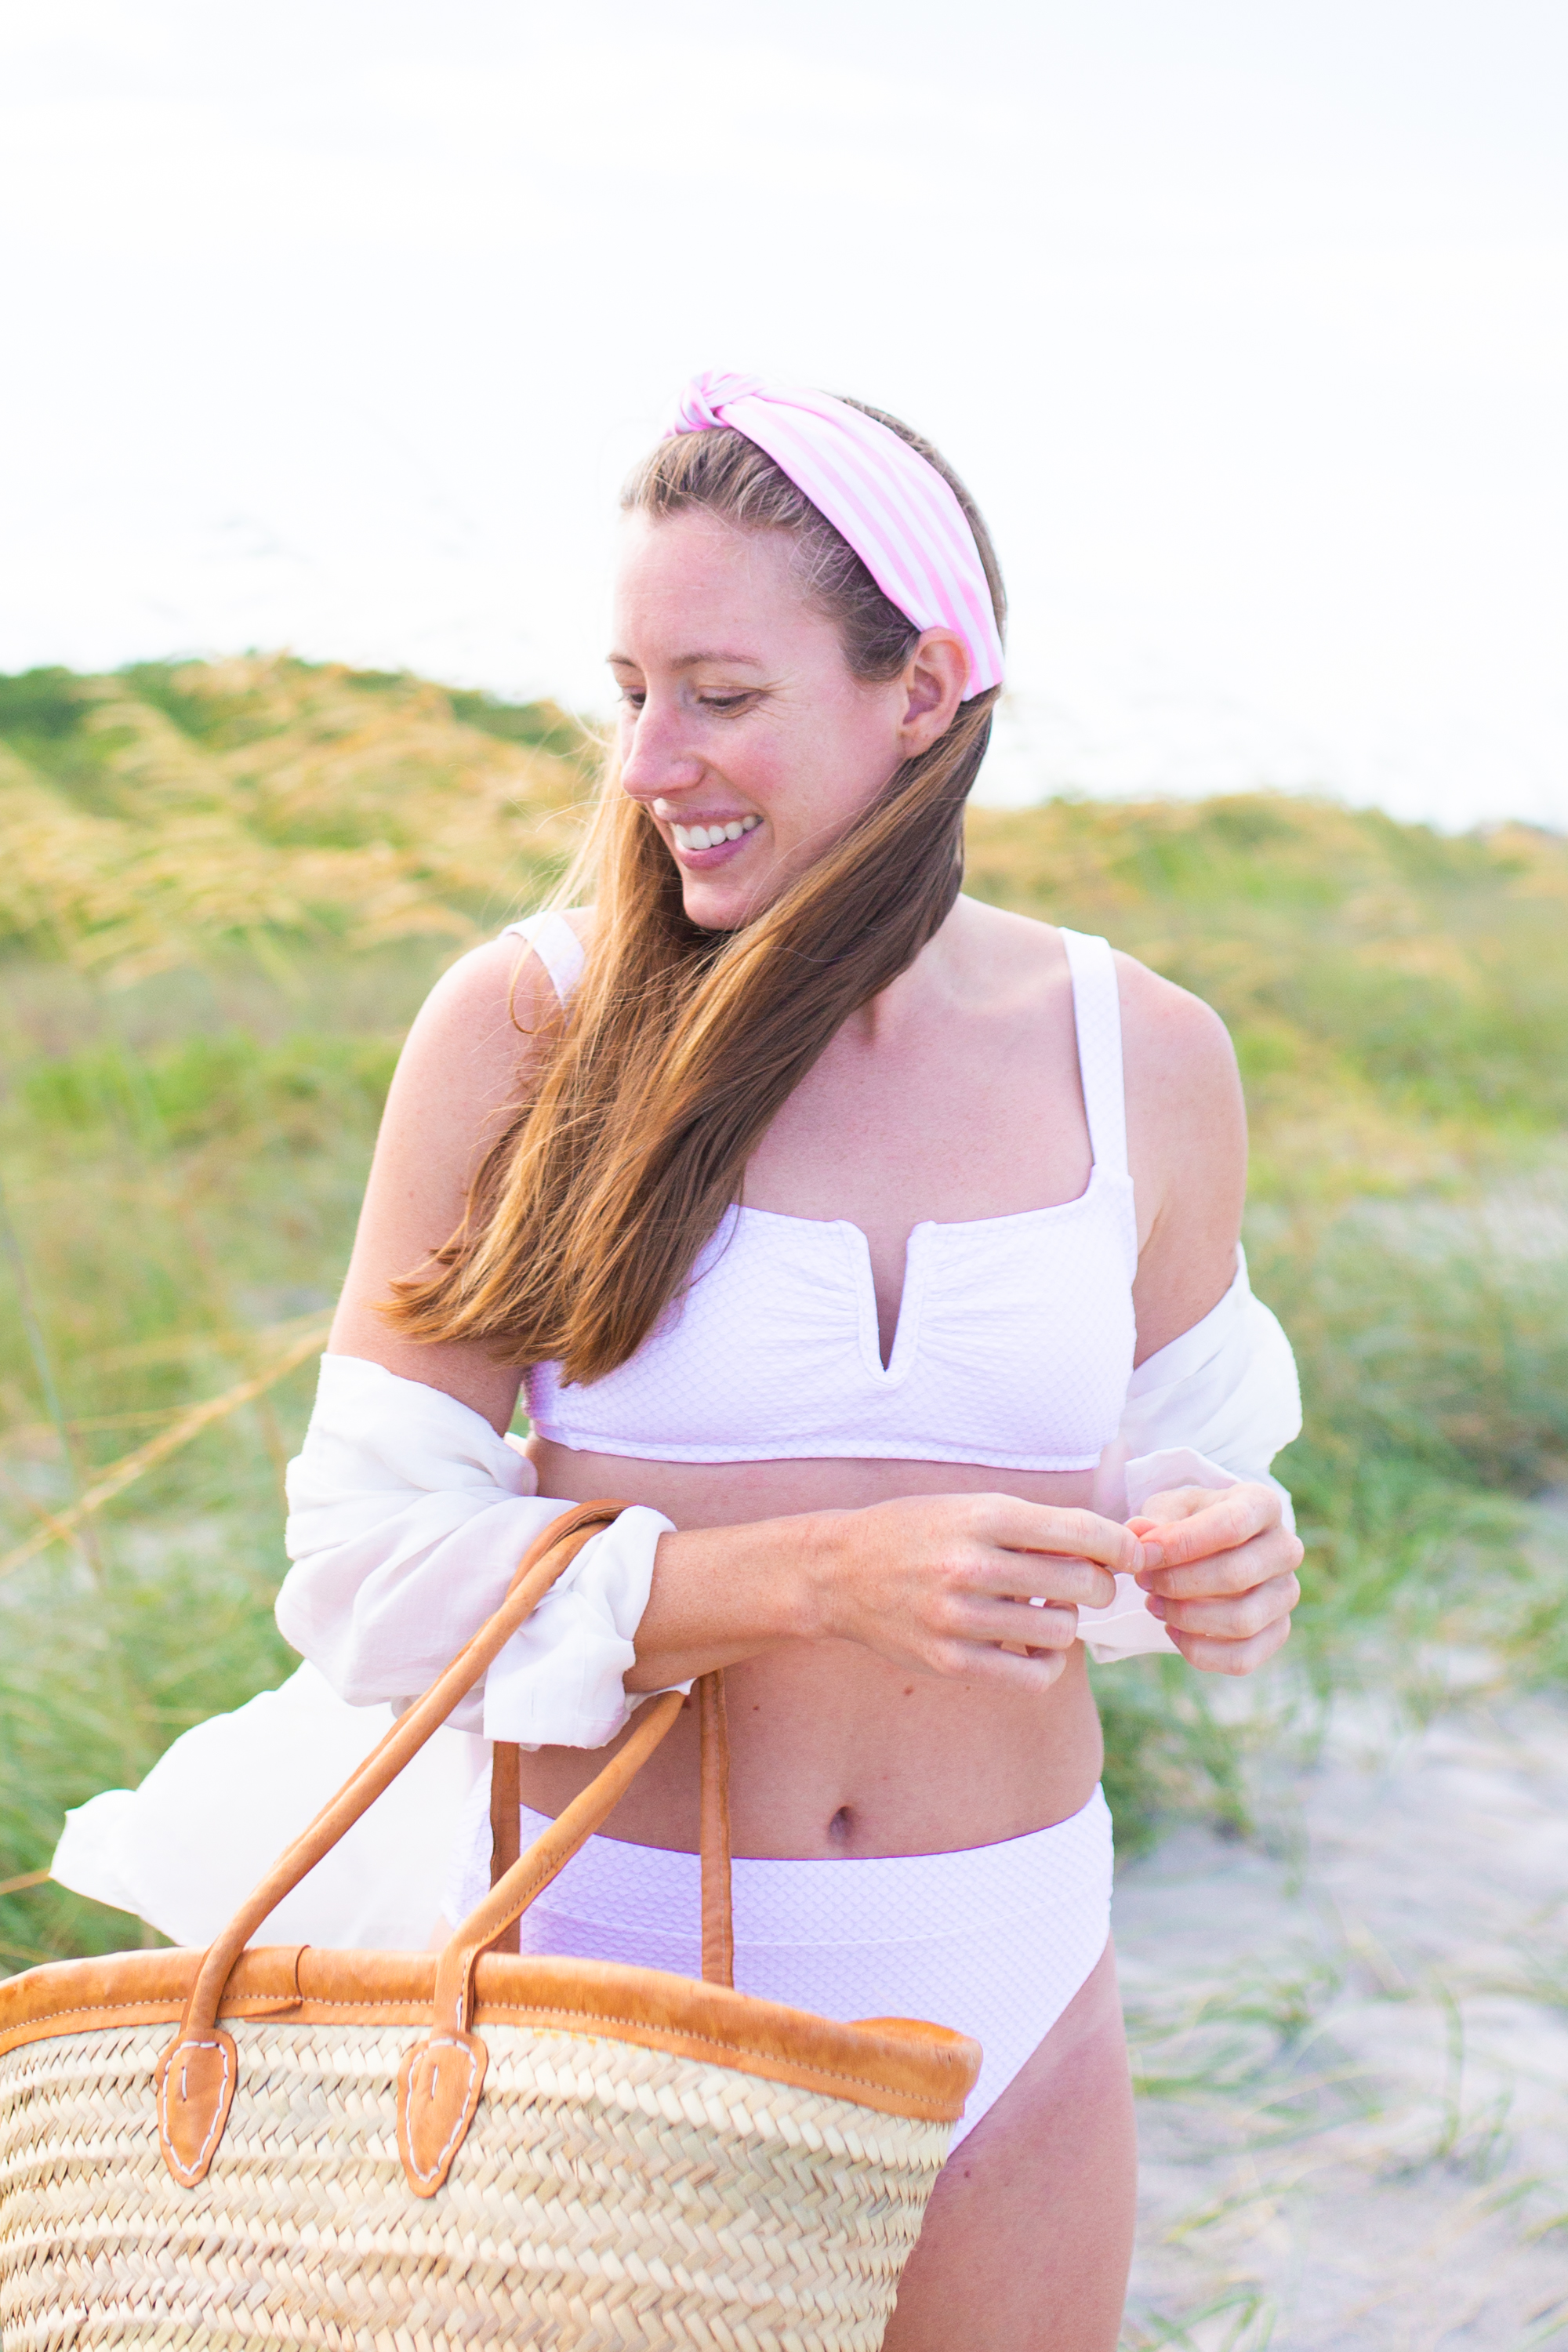 woman smiling at the beach and wearing a two piece Swimsuit, wearing a pink headband, and holding weaved bag